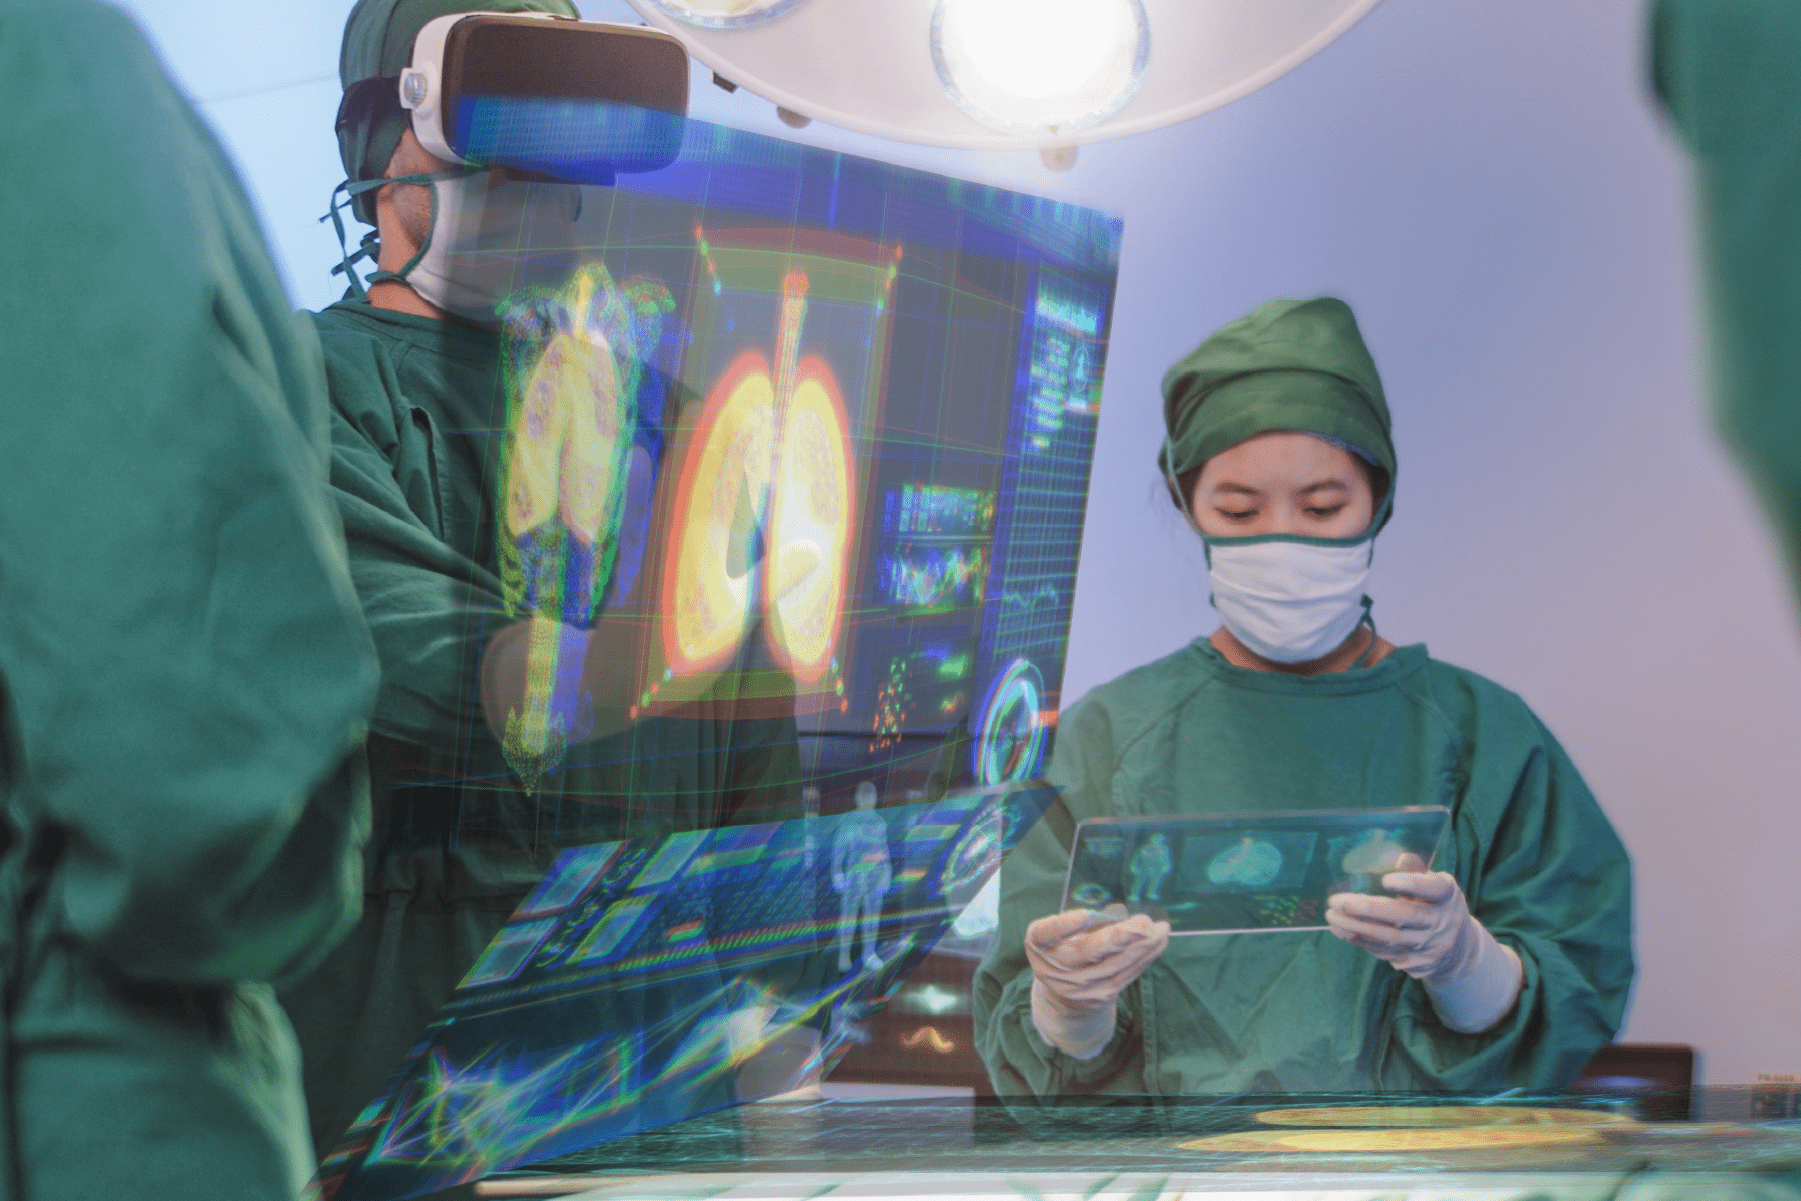 Surgeon Using Augmented Reality to look at xrays